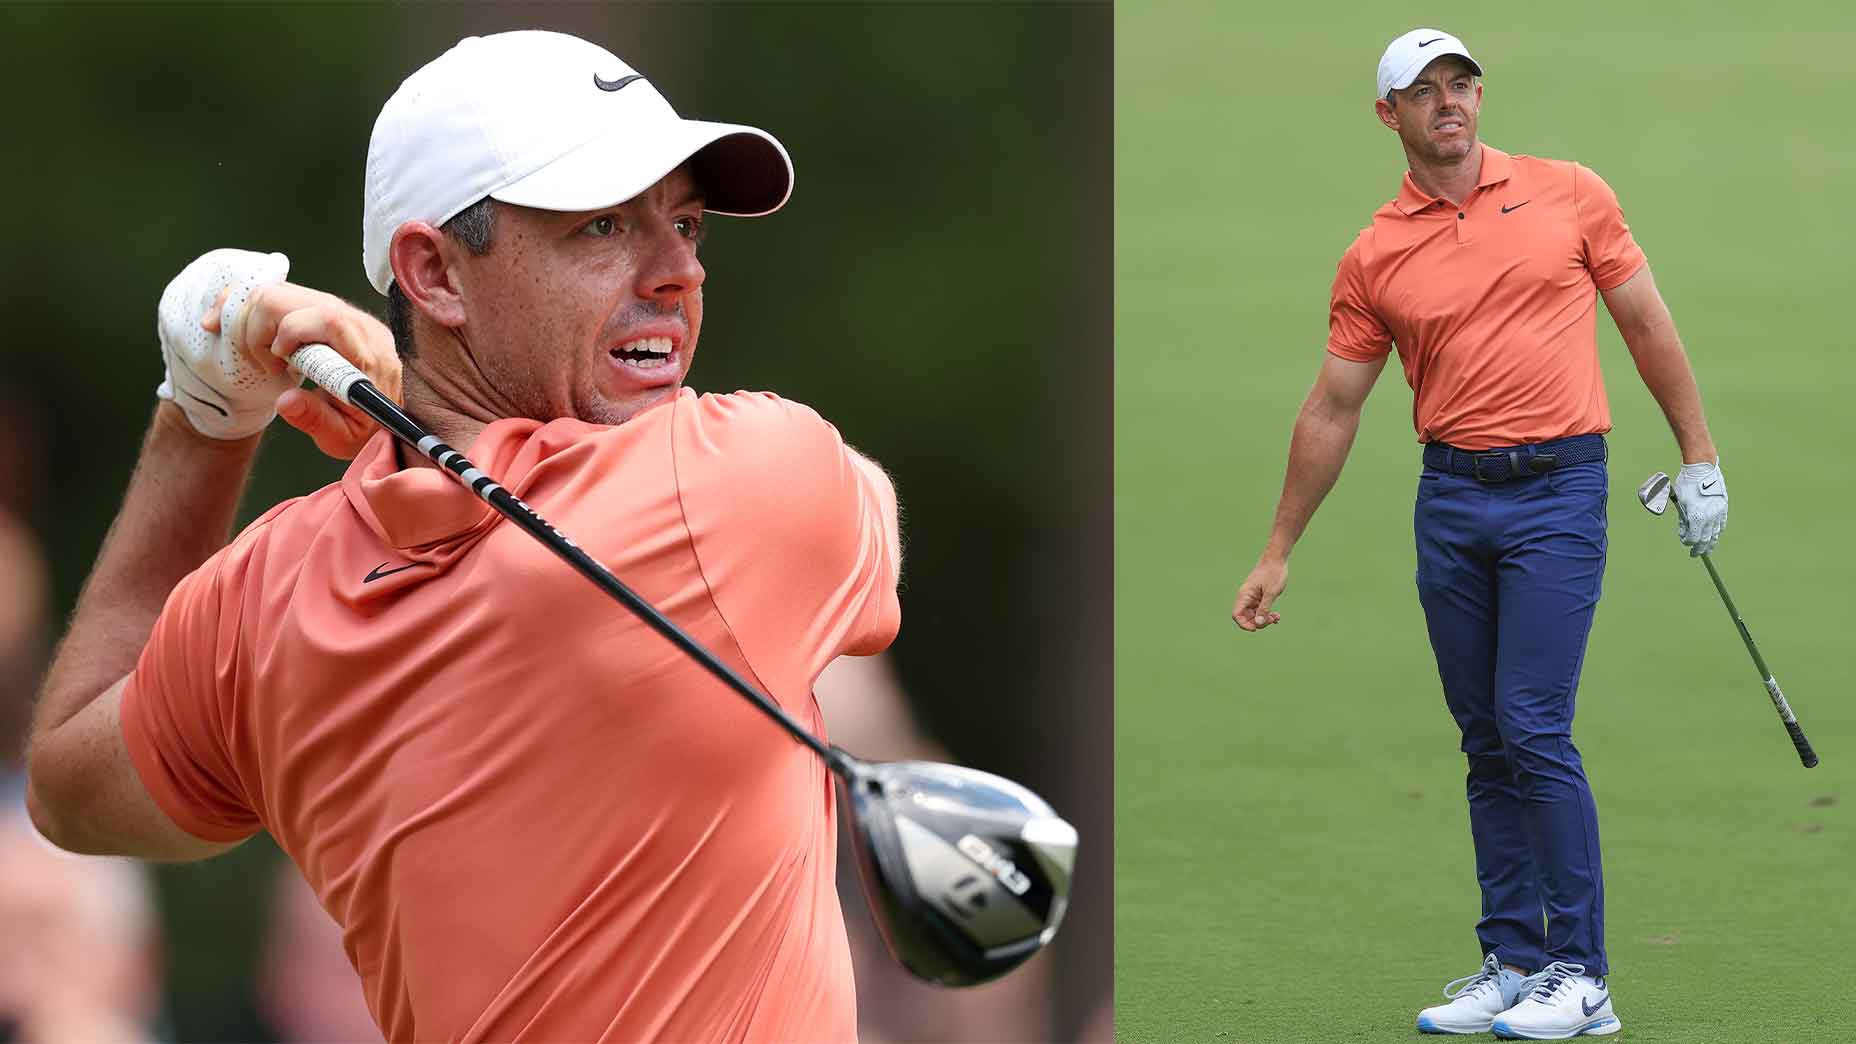 Pro golfer Rory McIlroy's Thursday look at the U.S. Open ticks all the boxes: it's fresh, trendy (not flashy!) and fits well. Here's how to buy it.